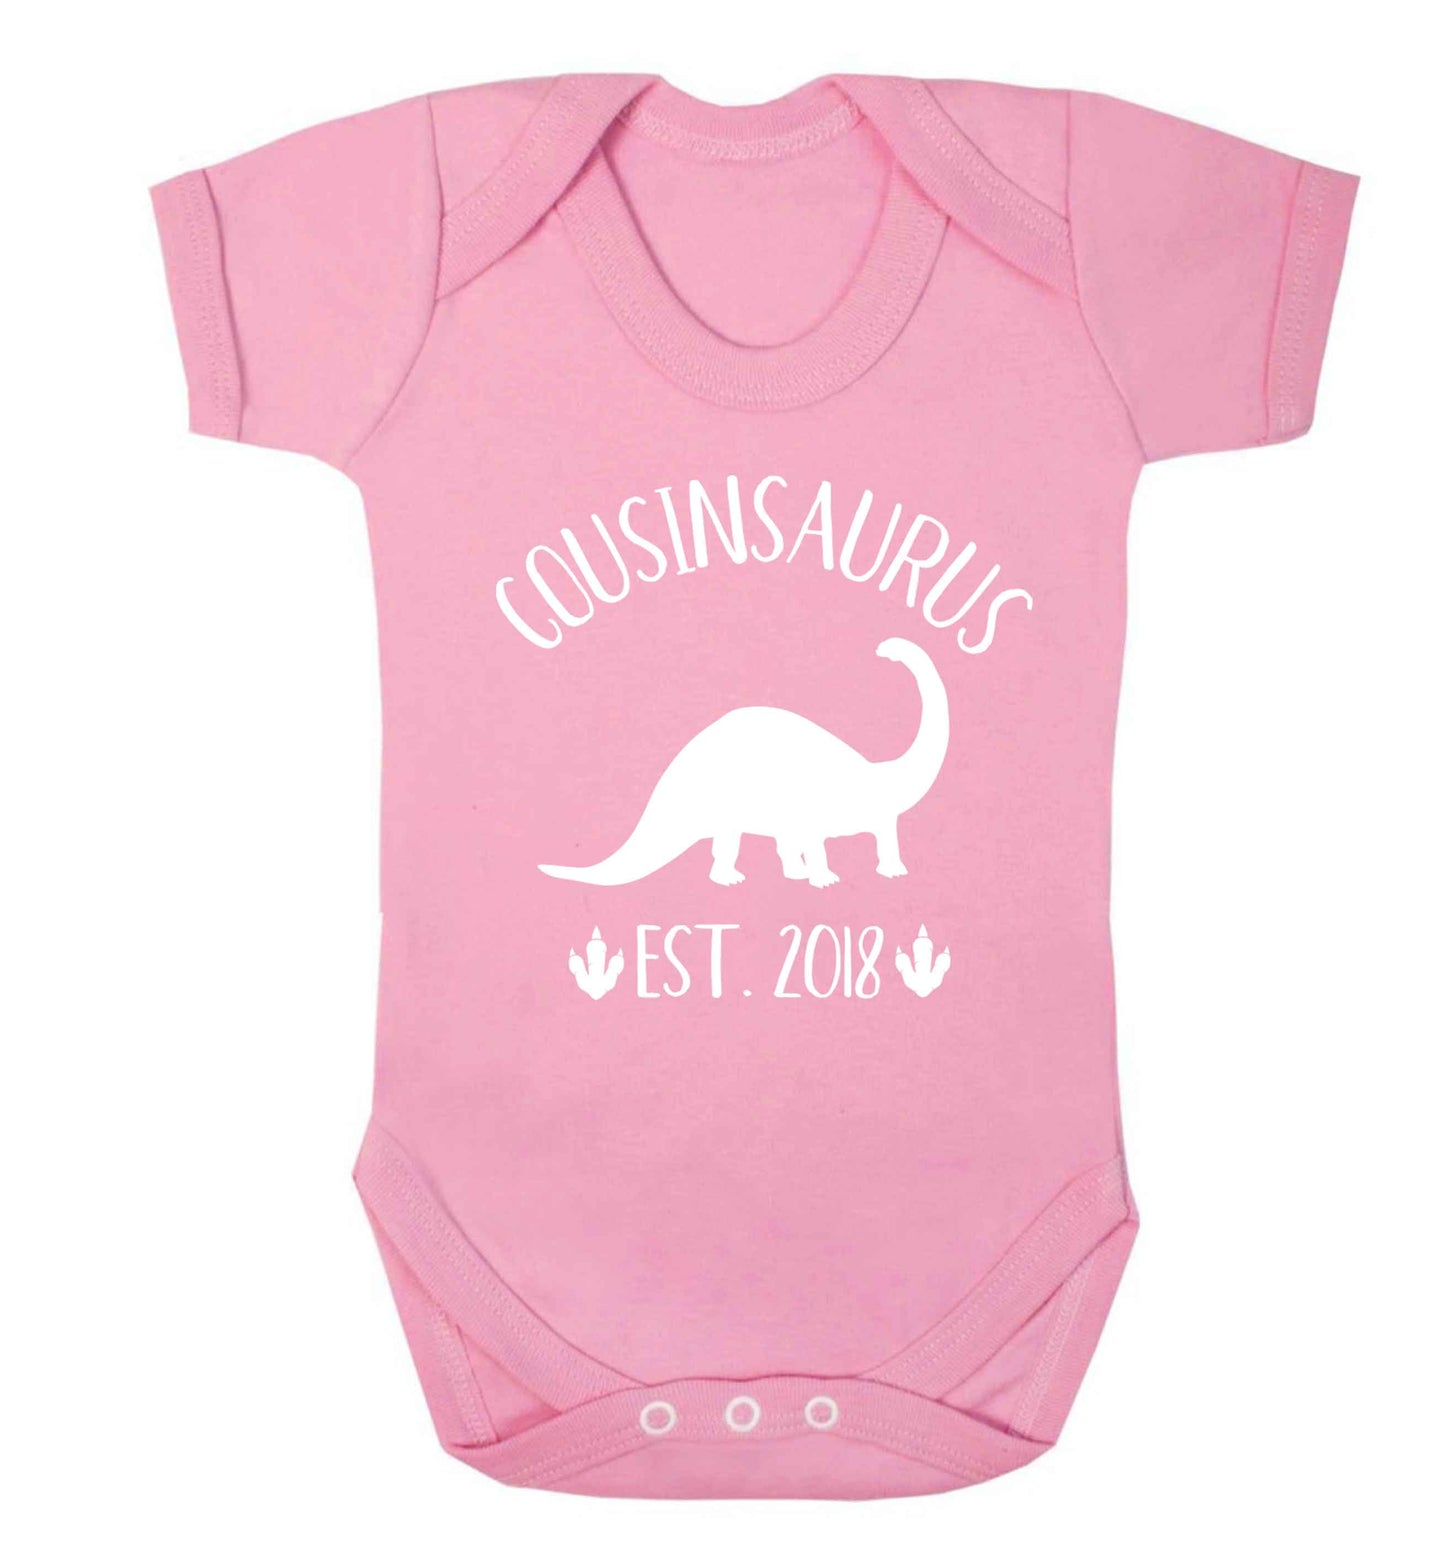 Personalised cousinsaurus since (custom date) Baby Vest pale pink 18-24 months